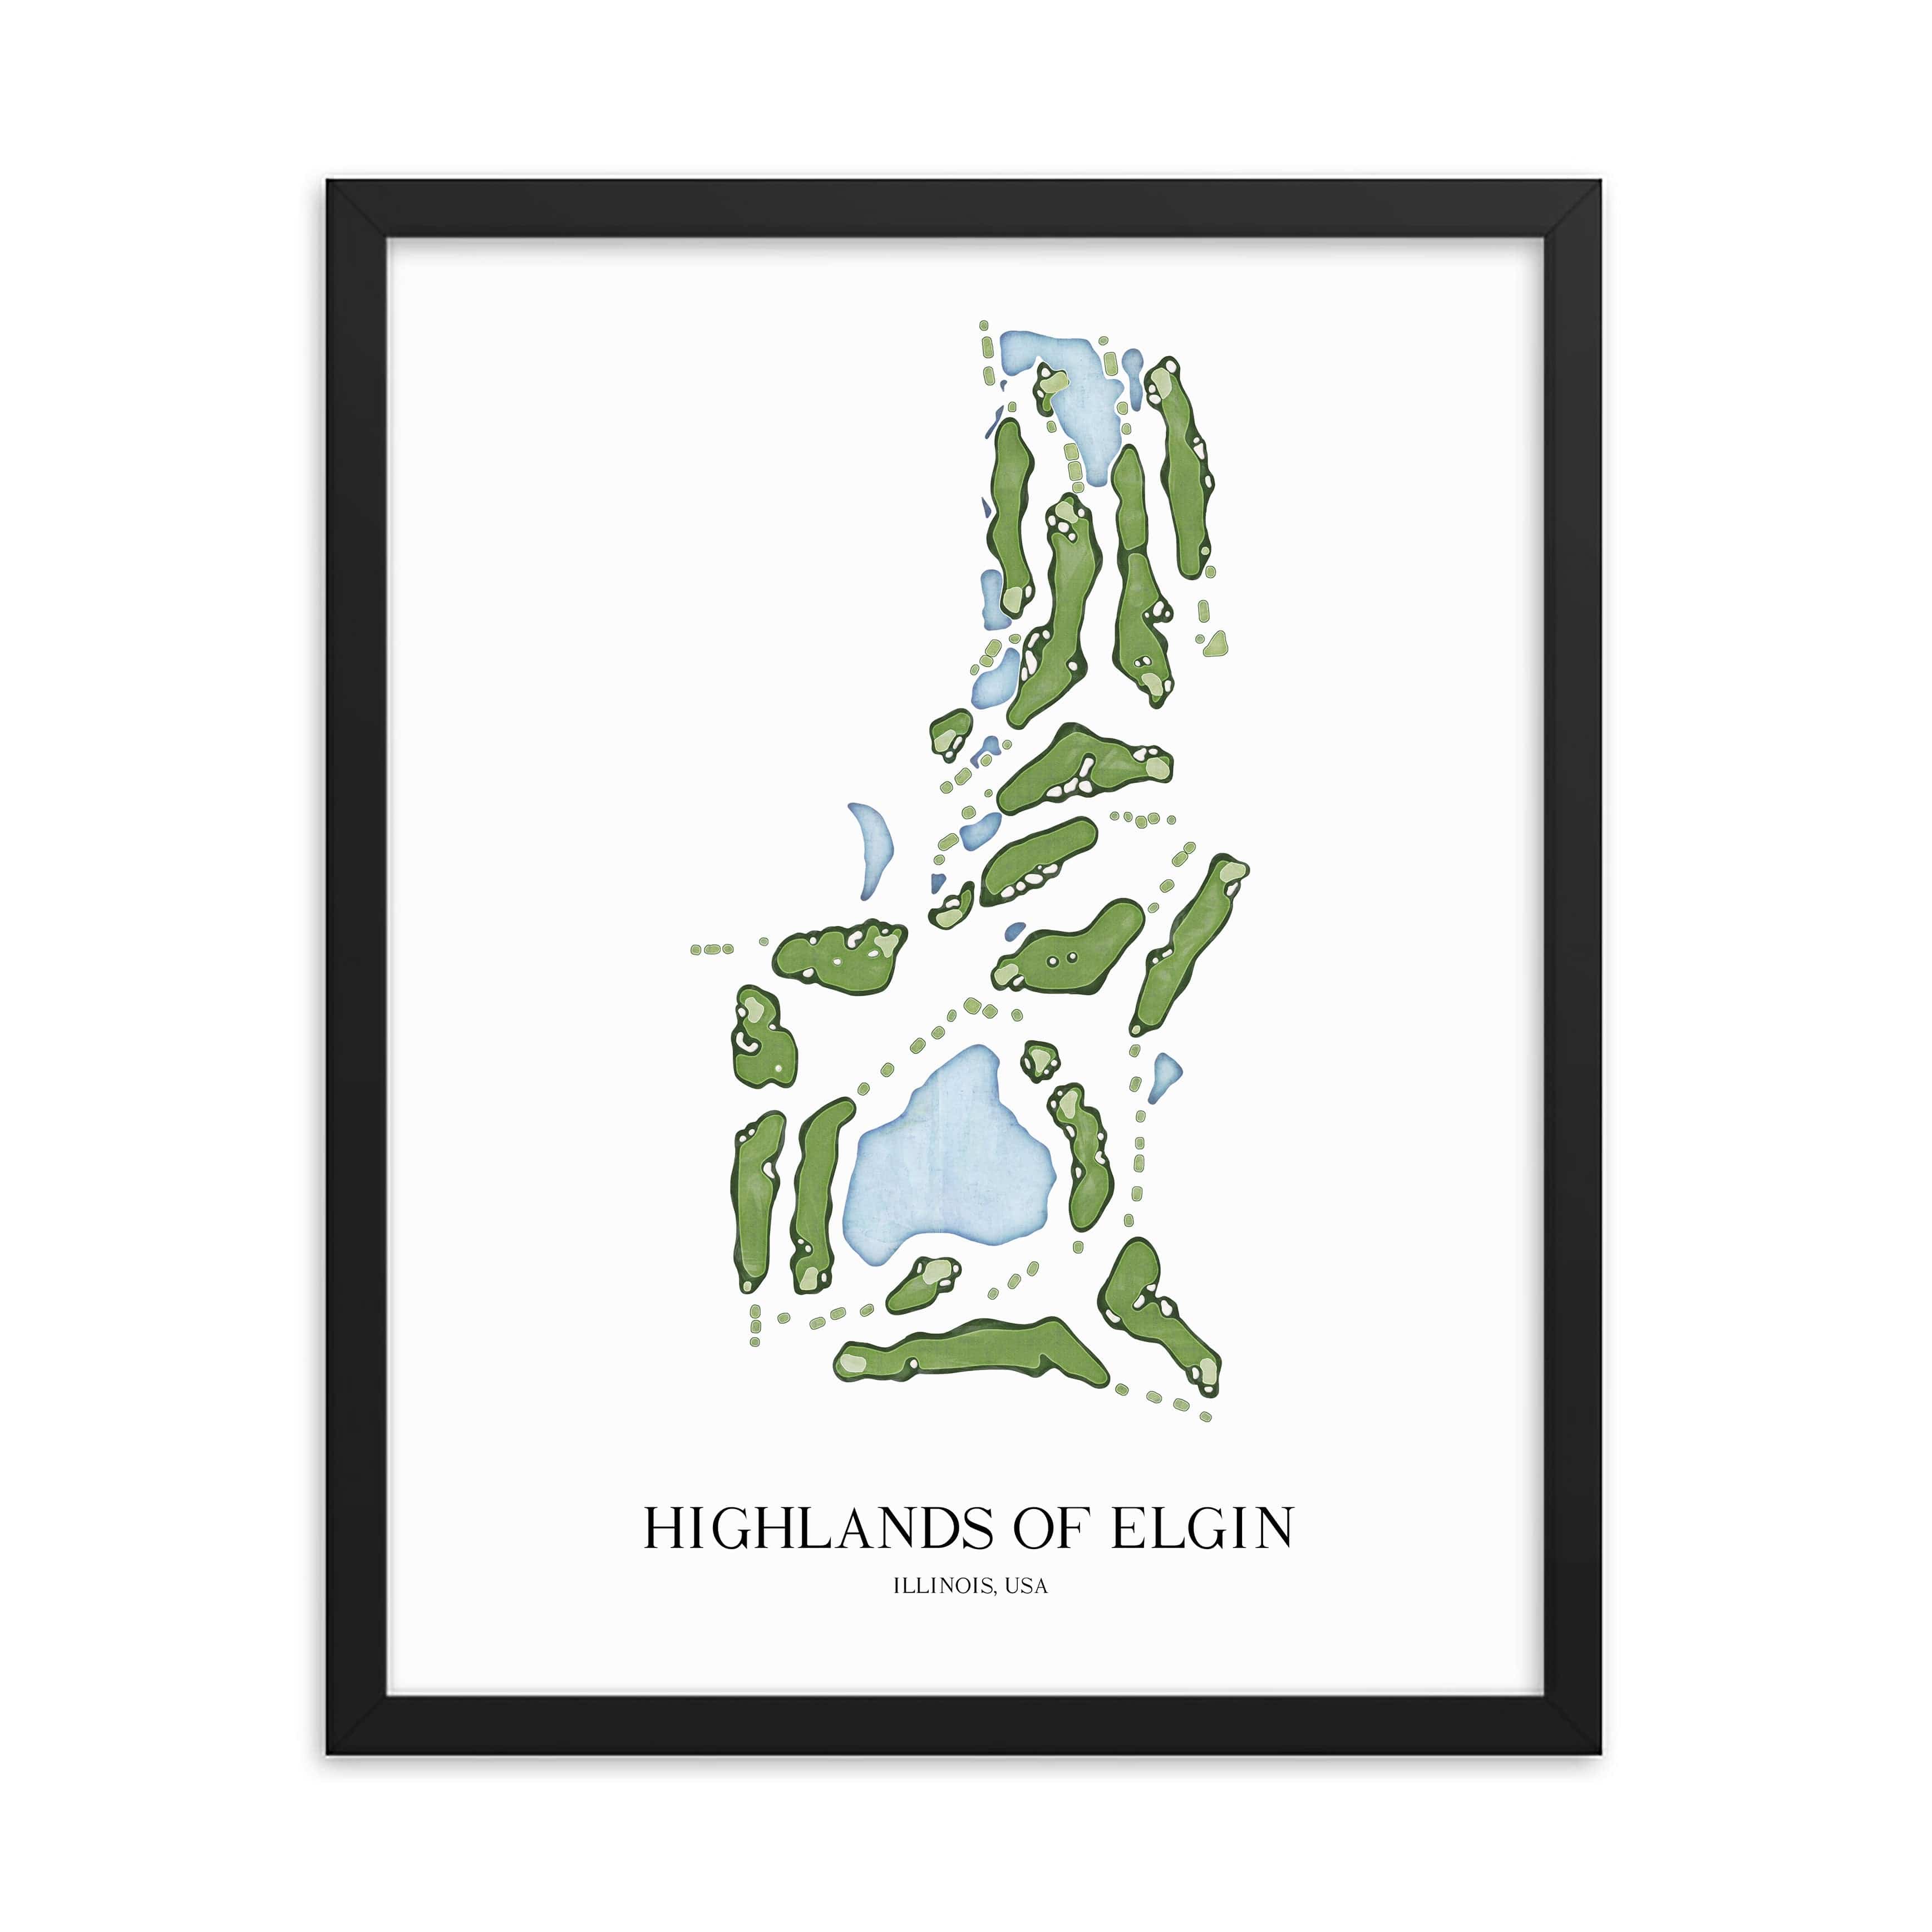 The 19th Hole Golf Shop - Golf Course Prints -  Highlands of Elgin Golf Course Map